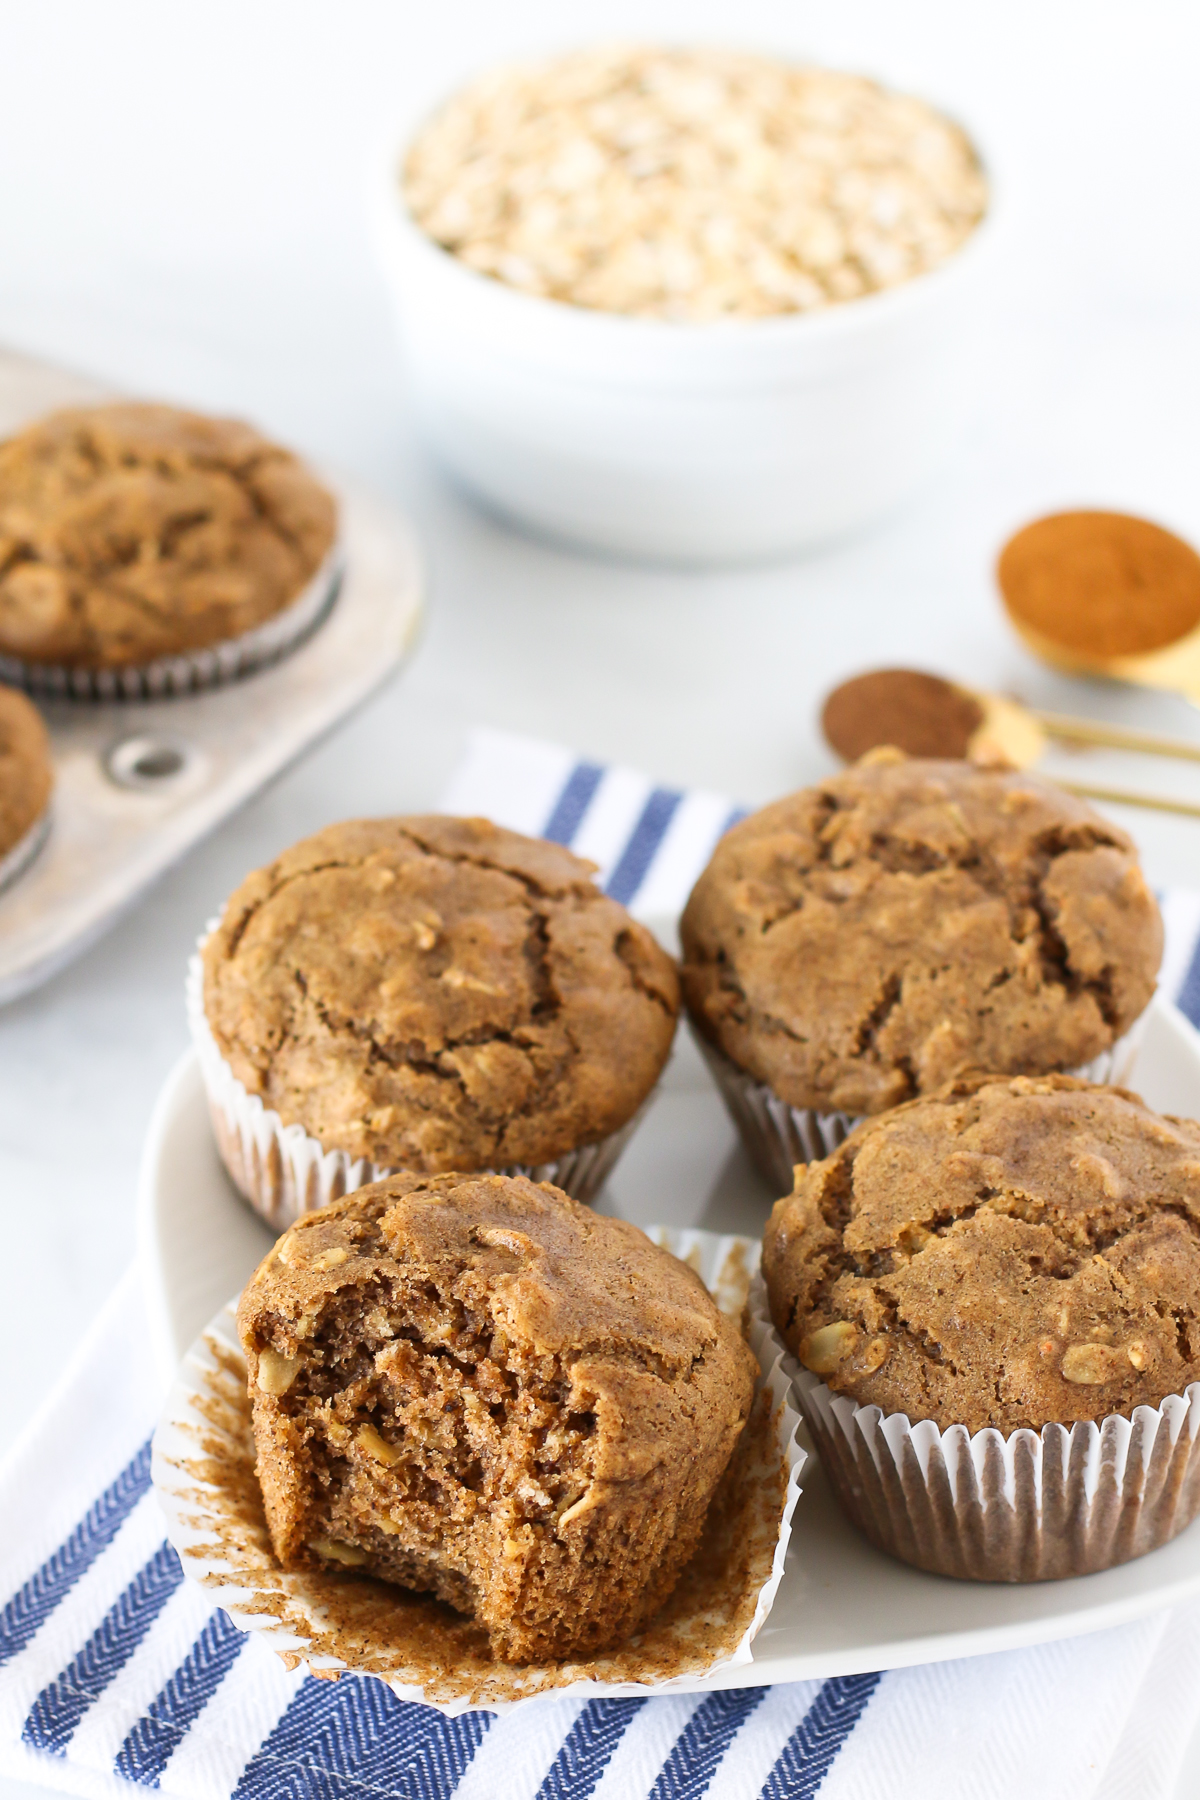 Gluten Free Vegan Oatmeal Spice Muffins. These tender muffins are filled with oats and warm spices, making them a lovely morning treat.